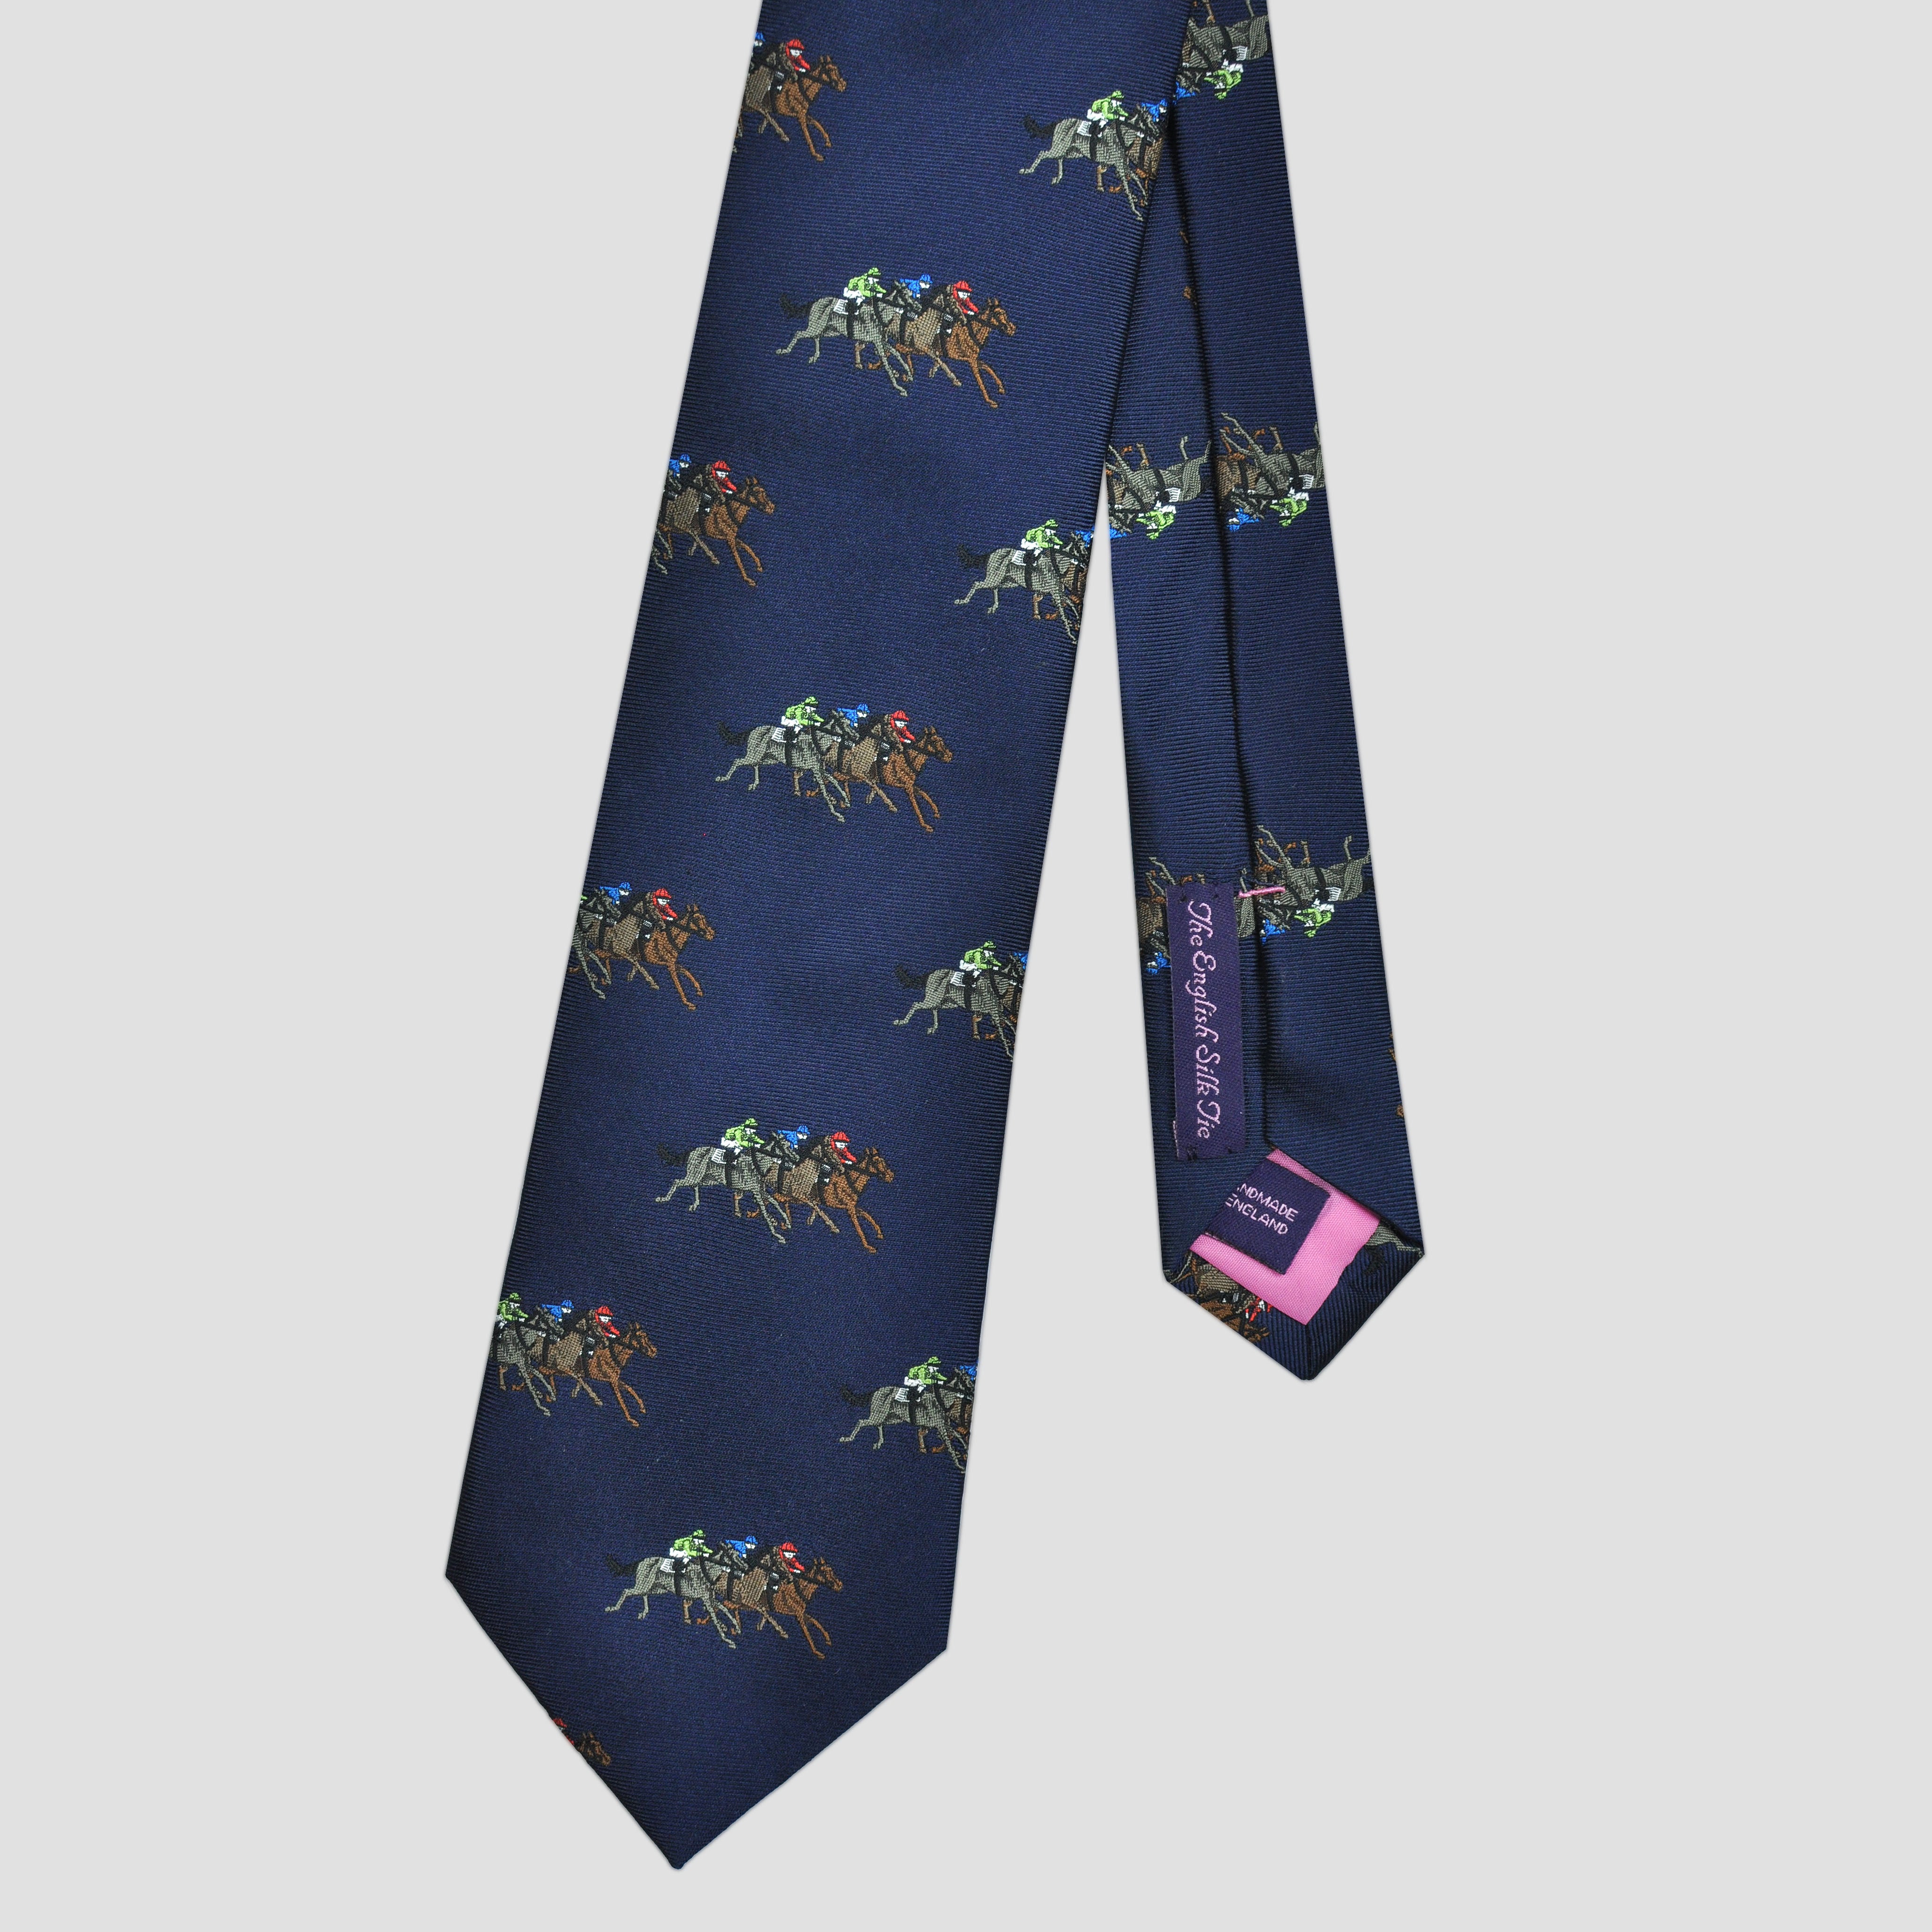 English Woven Silk 'At The Races' Tie in Navy